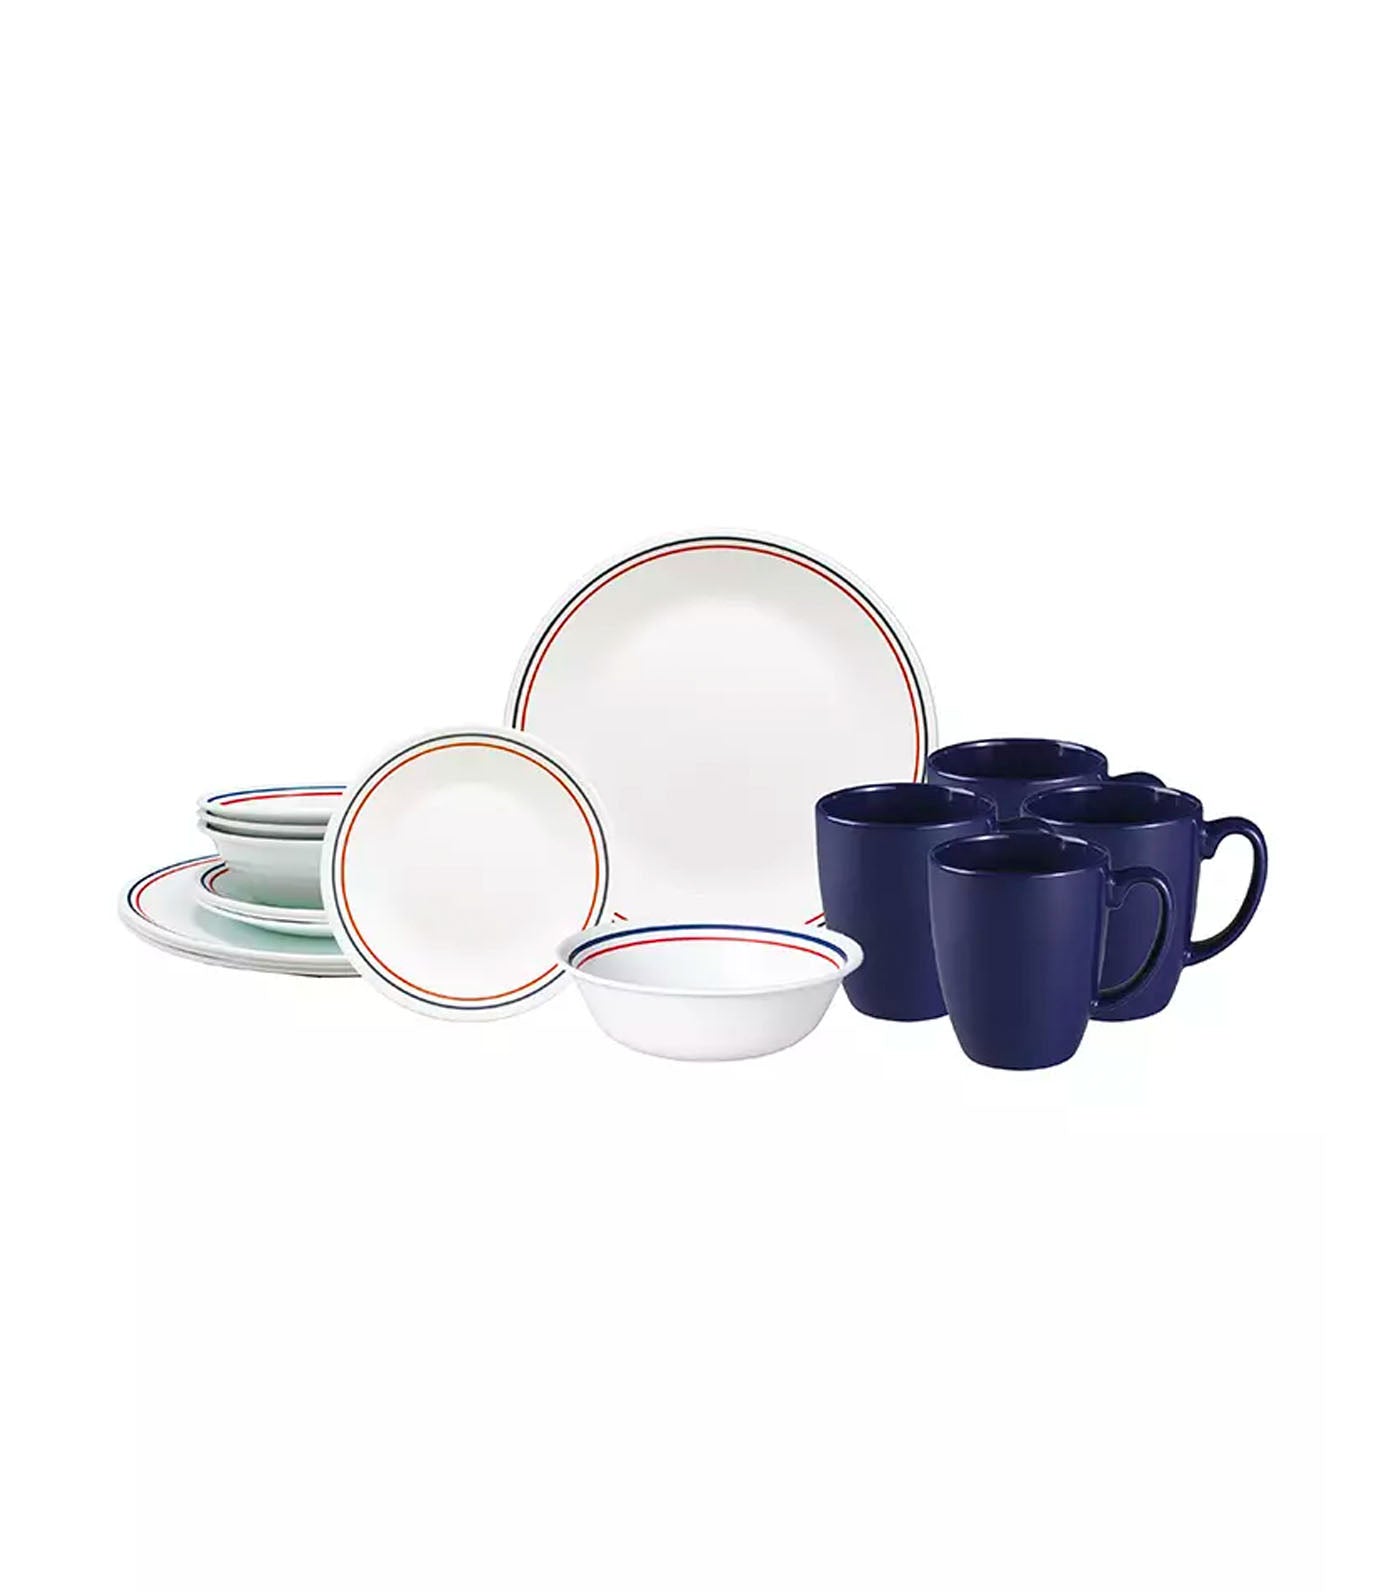 Corelle 16-Piece Classic Set - Red and Blue